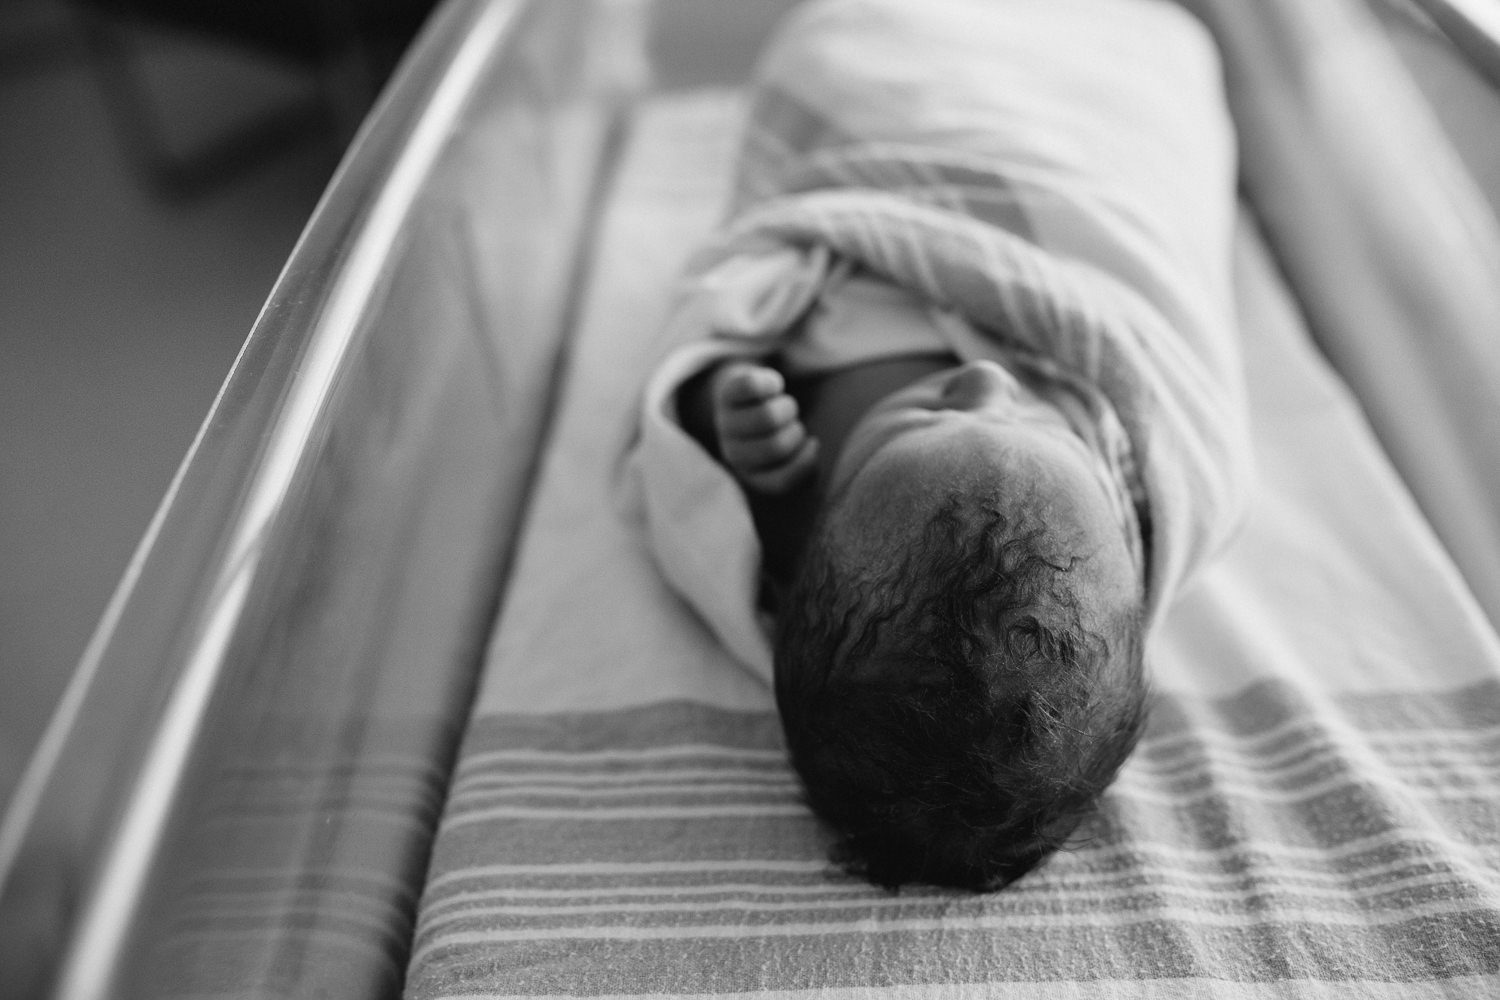 10 hour old baby boy swaddled sleeping in hospital bassinet - Barrie Fresh 48 Photography